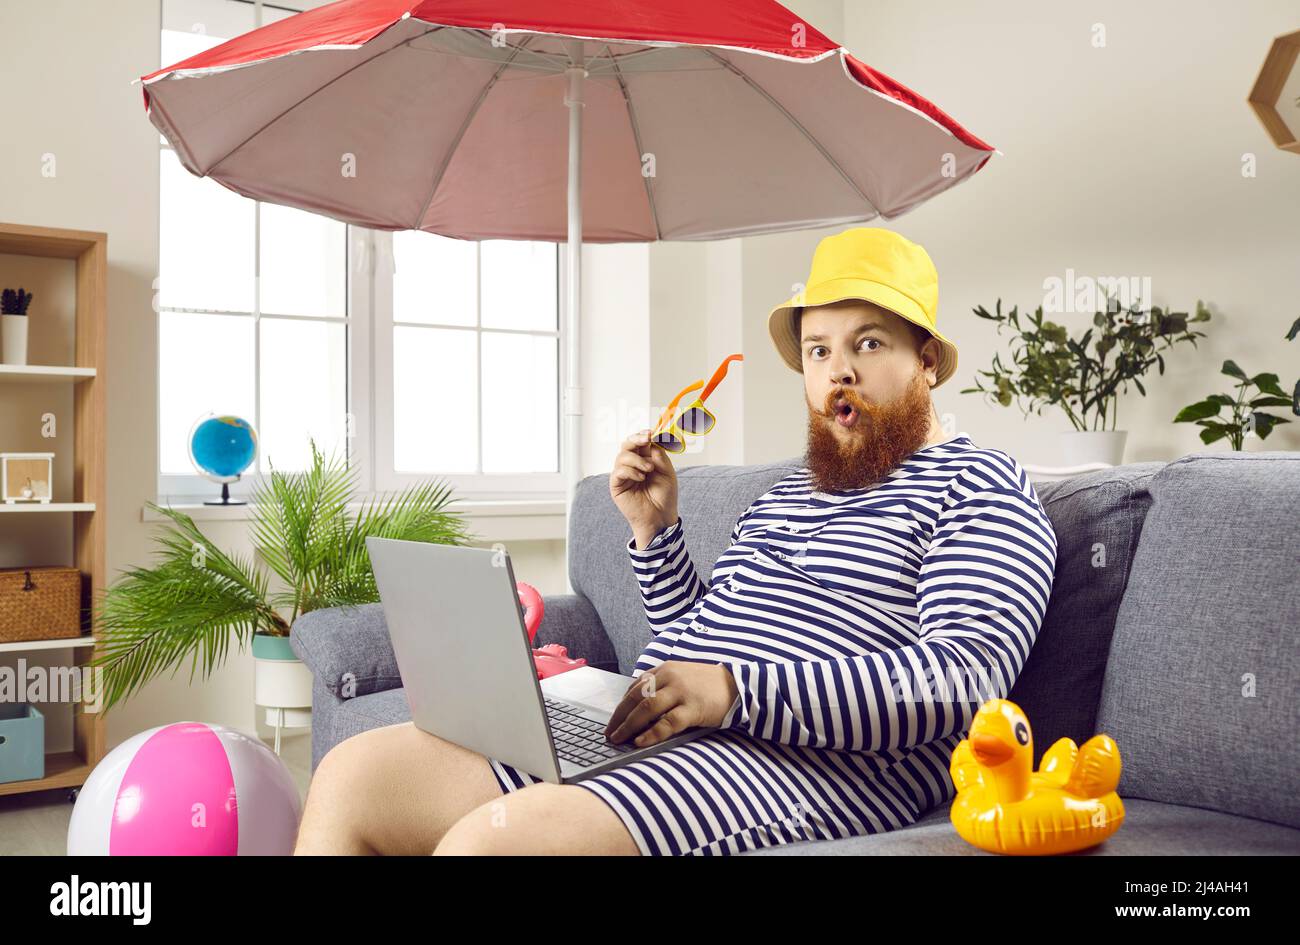 Funny chubby man is shocked that he is forced to spend summer vacation at home because of work. Stock Photo